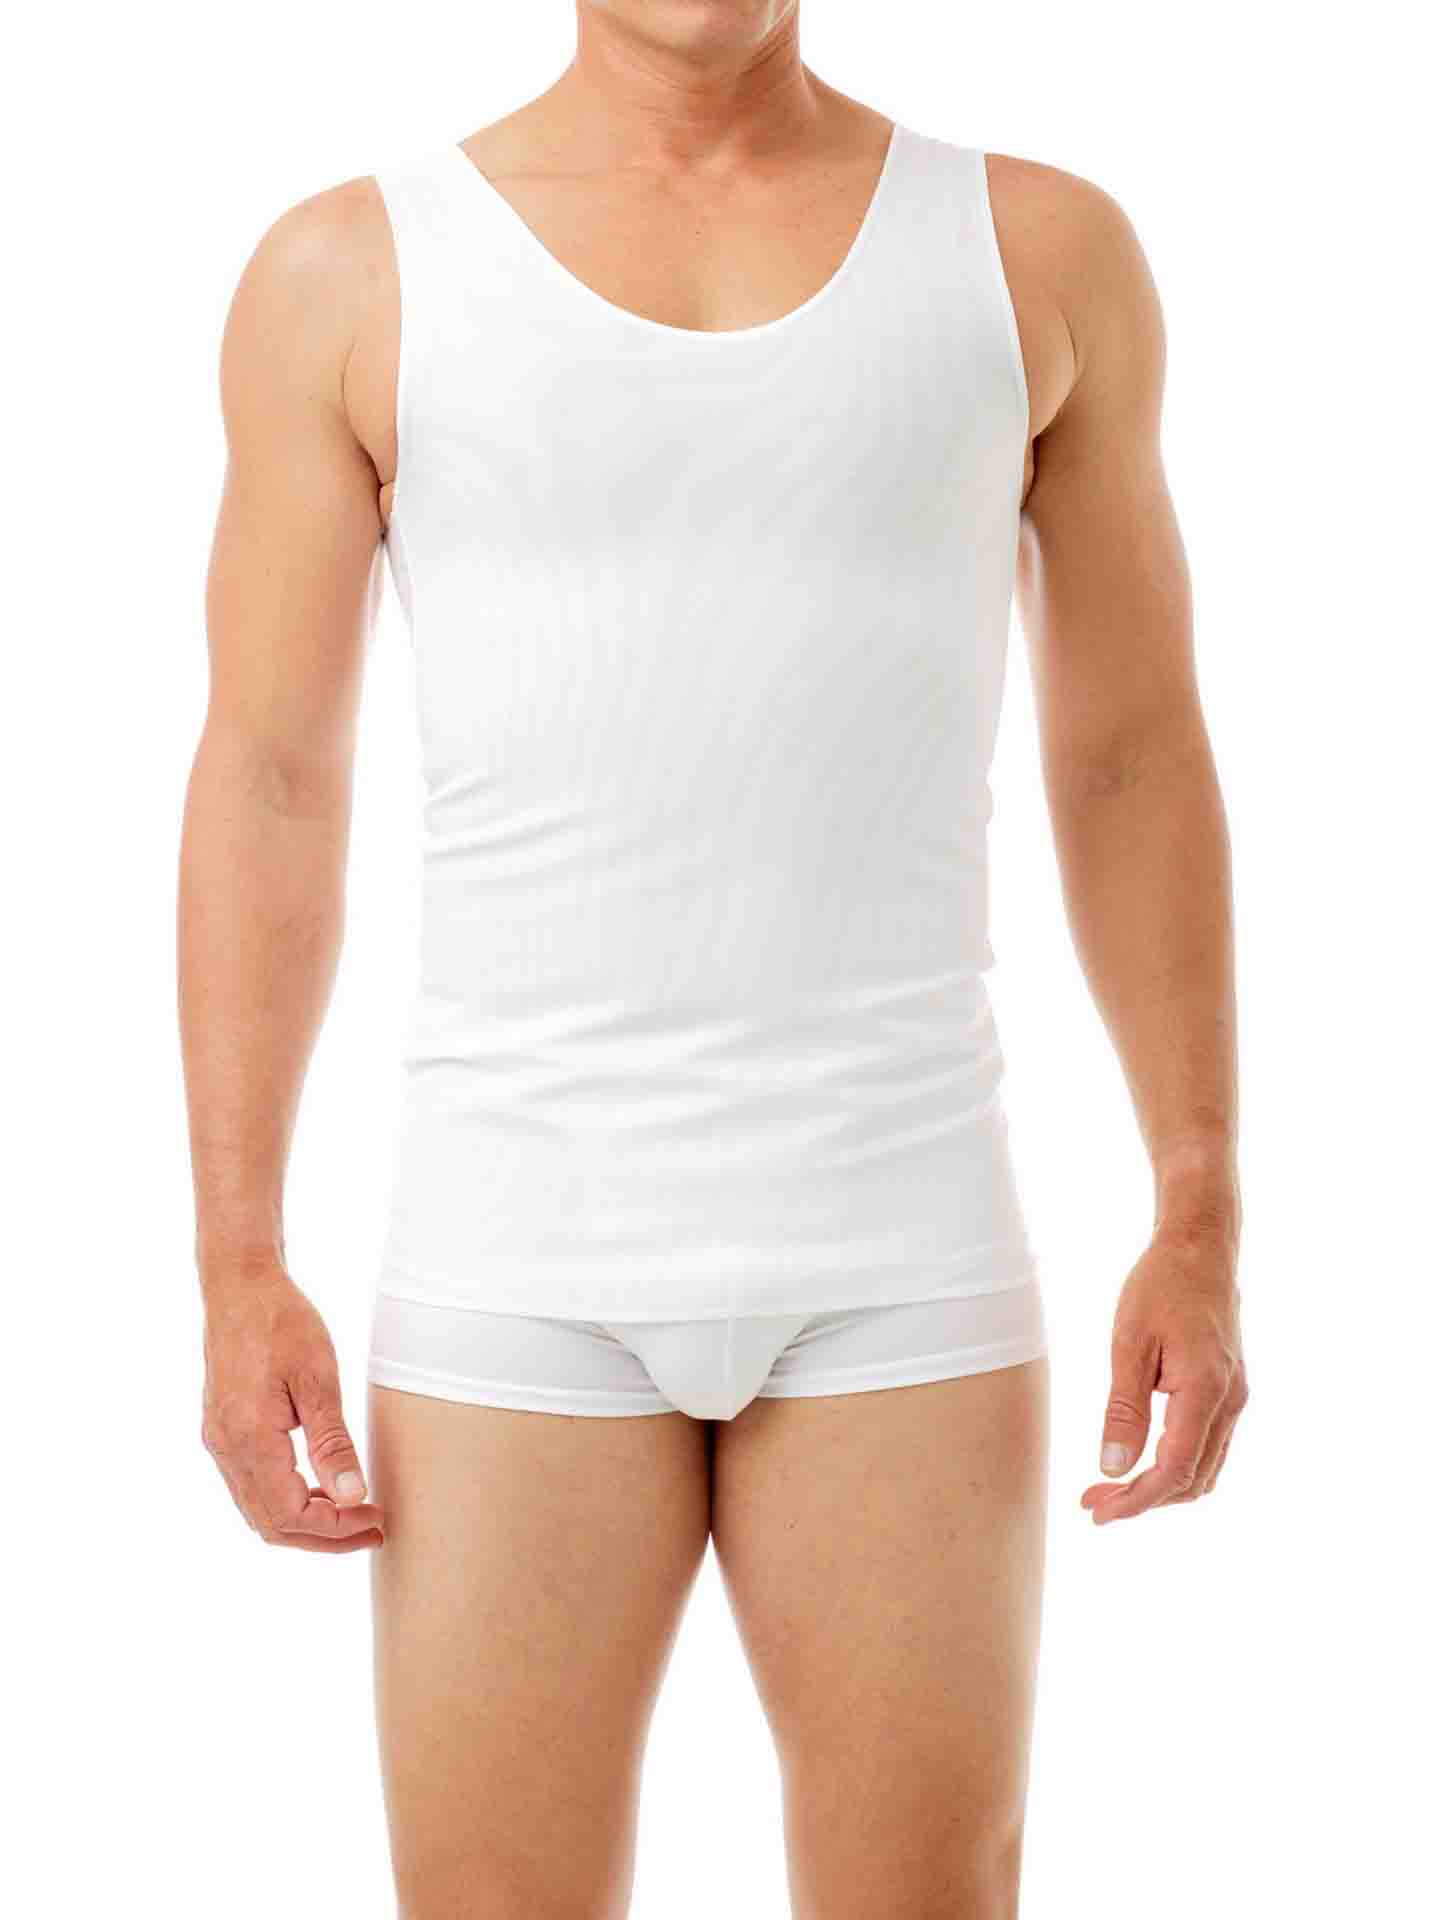 The front of the white Ultimate Chest Binder Tank.